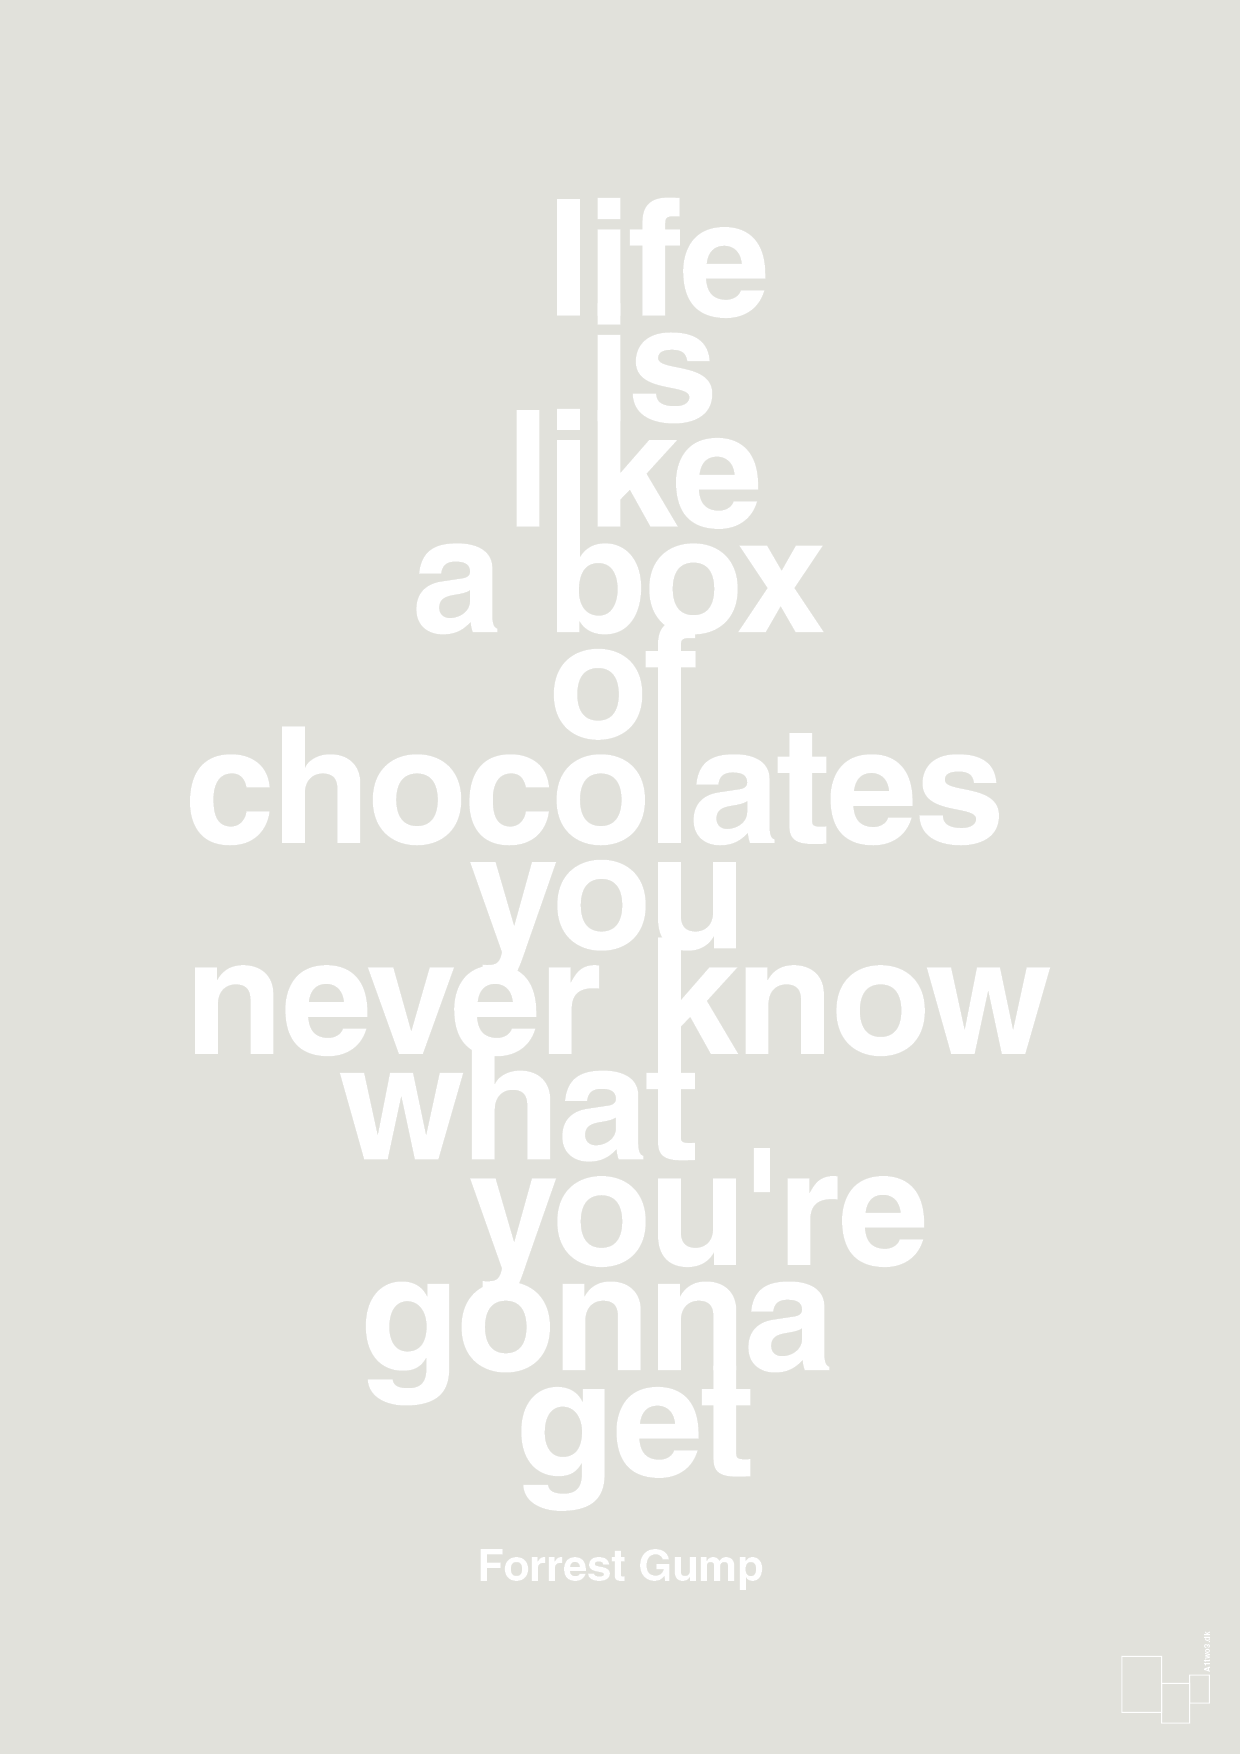 life is like a box of chocolates you never know what you're gonna get - Plakat med Citater i Painters White